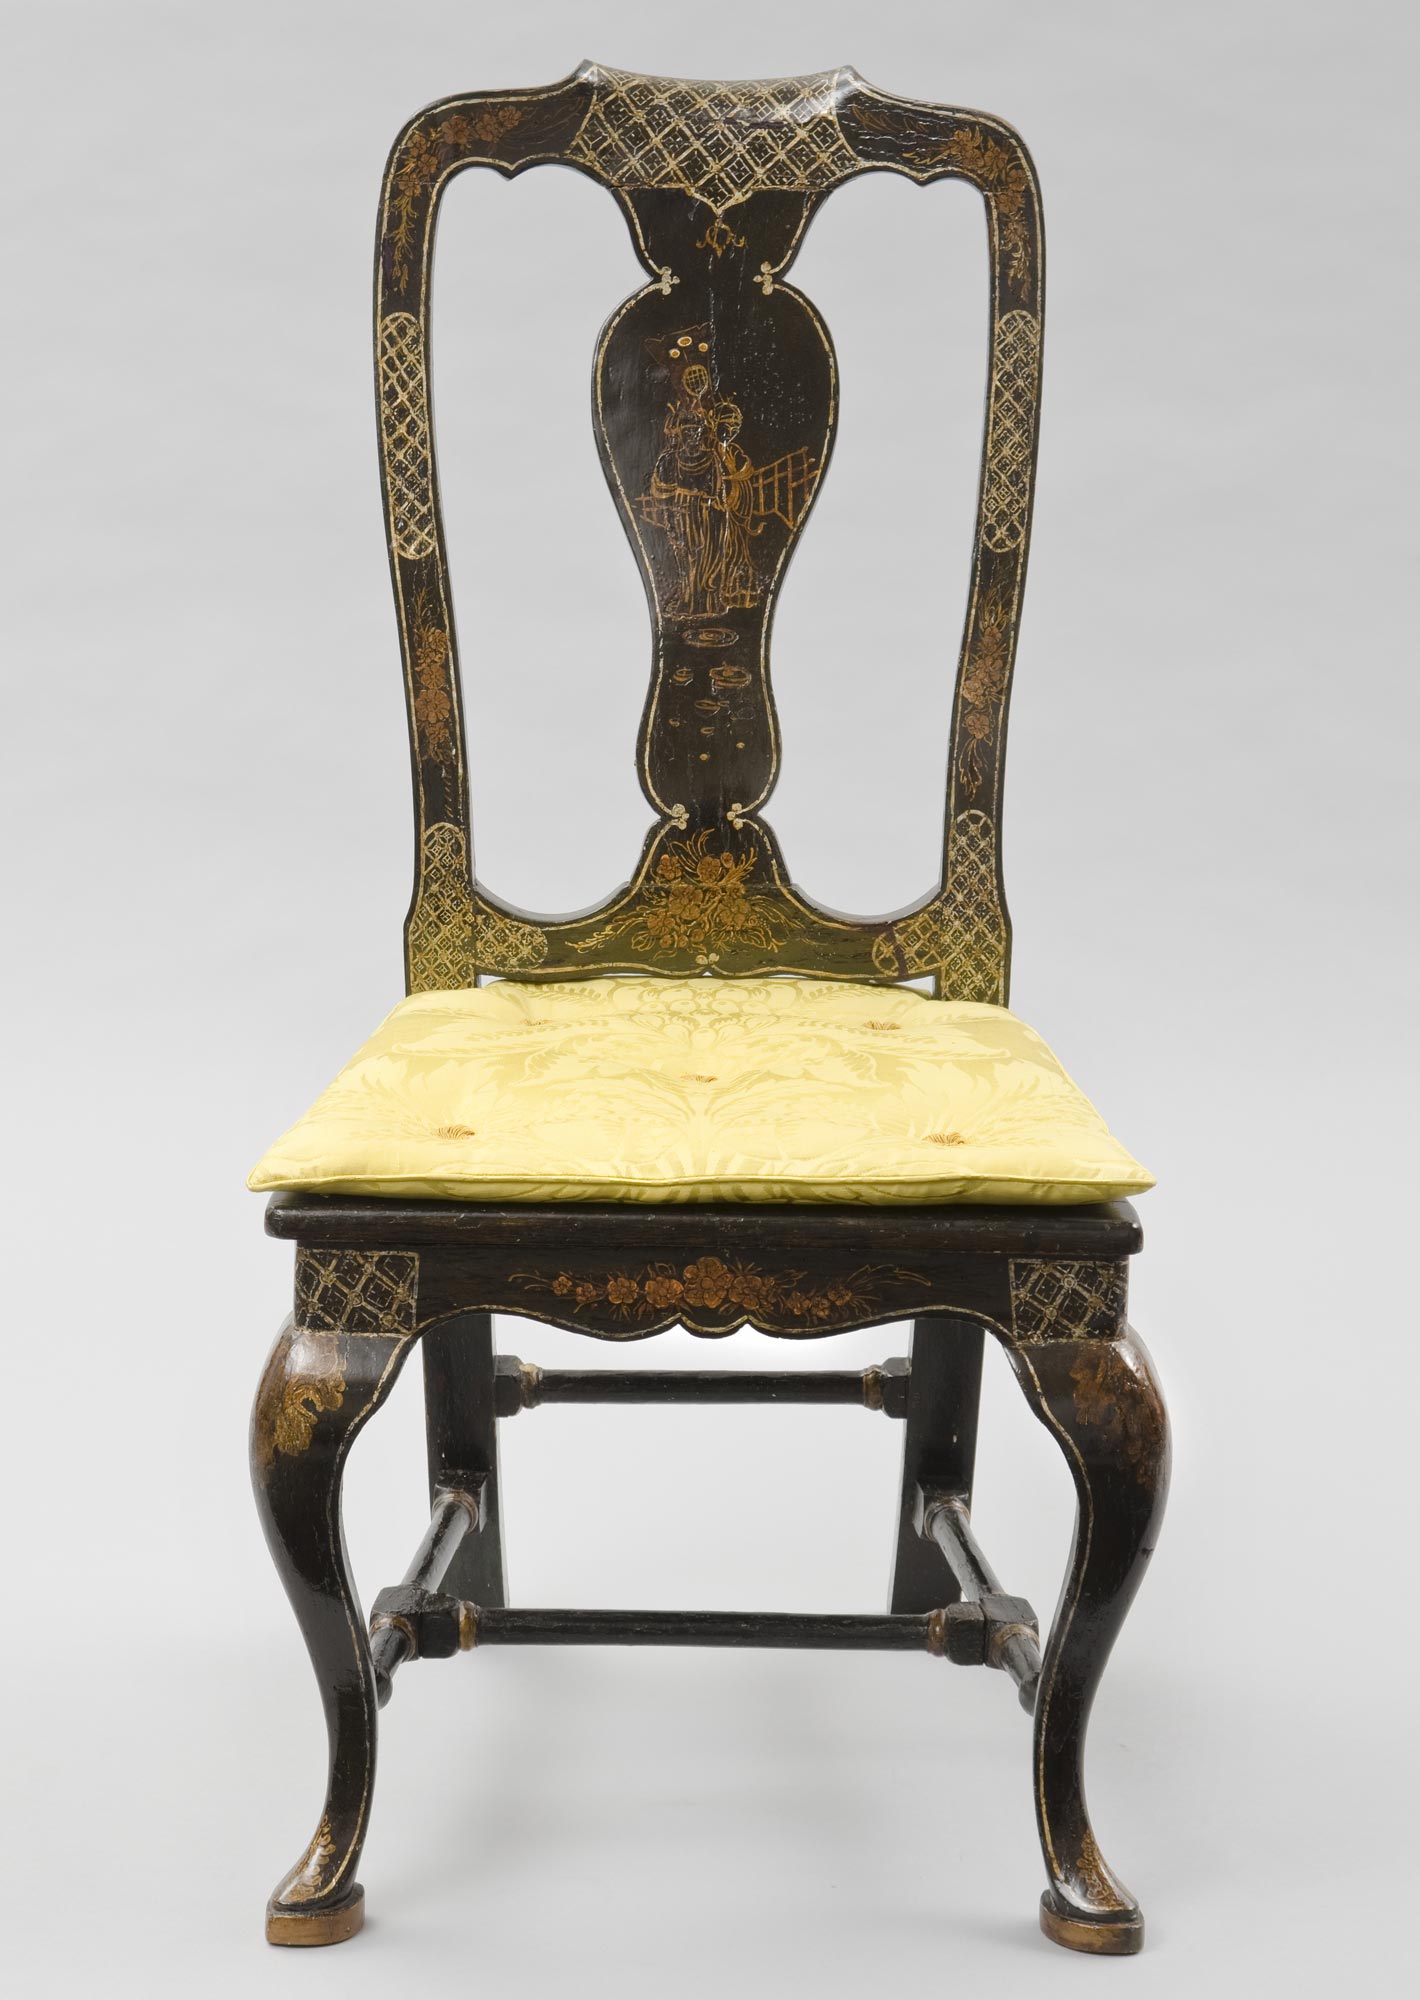 Venetian Antique Side Chairs | Chinoiserie Antique Side Chair